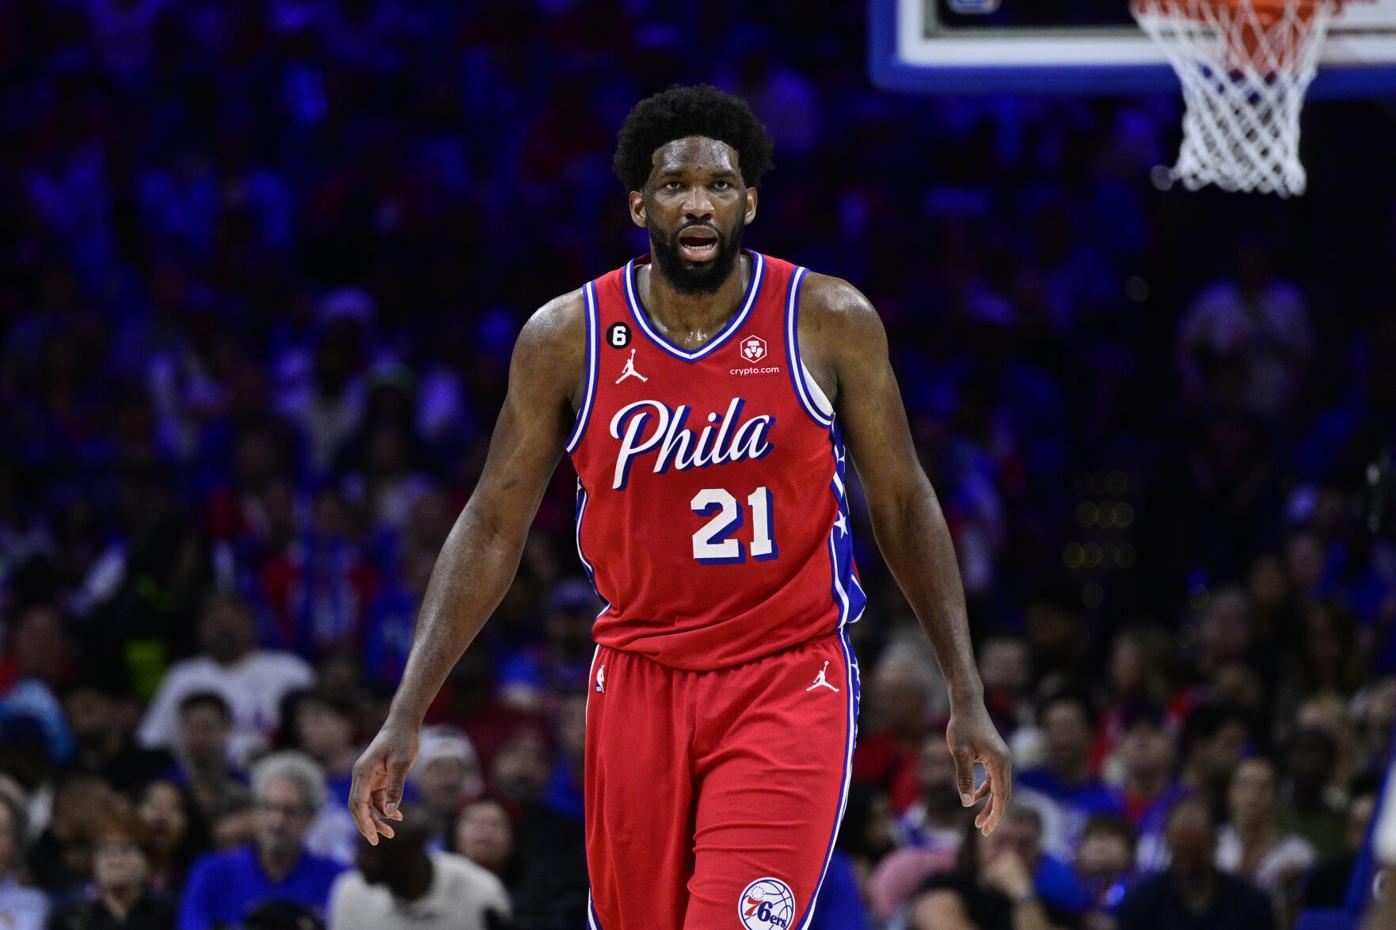 Video: Colorado HC Deion Sanders Meets with Joel Embiid, 76ers at